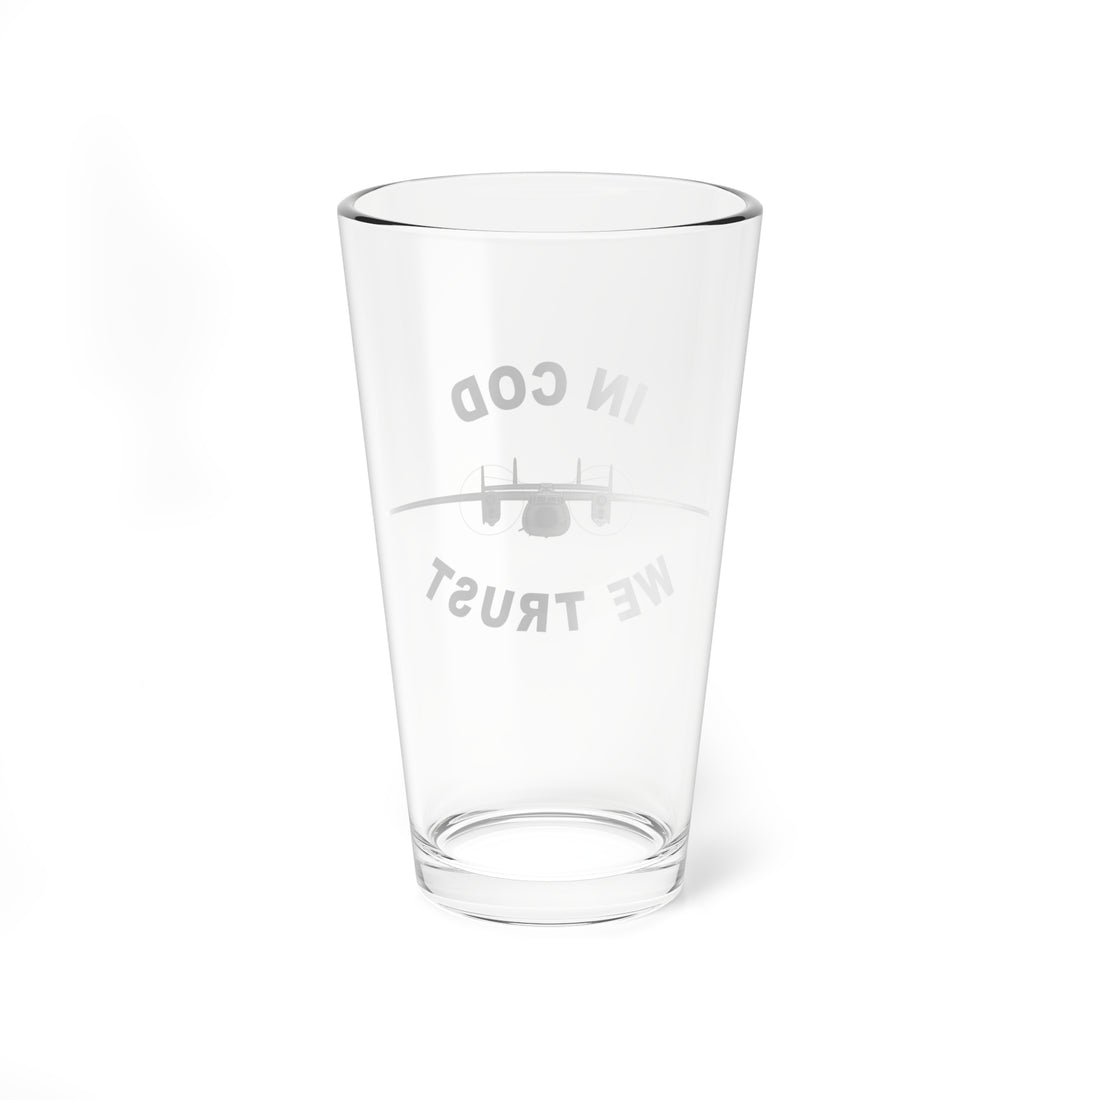 C-2 "Greyhound" IN COD WE TRUST Pint Glass, Navy Carrier Onboard Delivery Aircraft